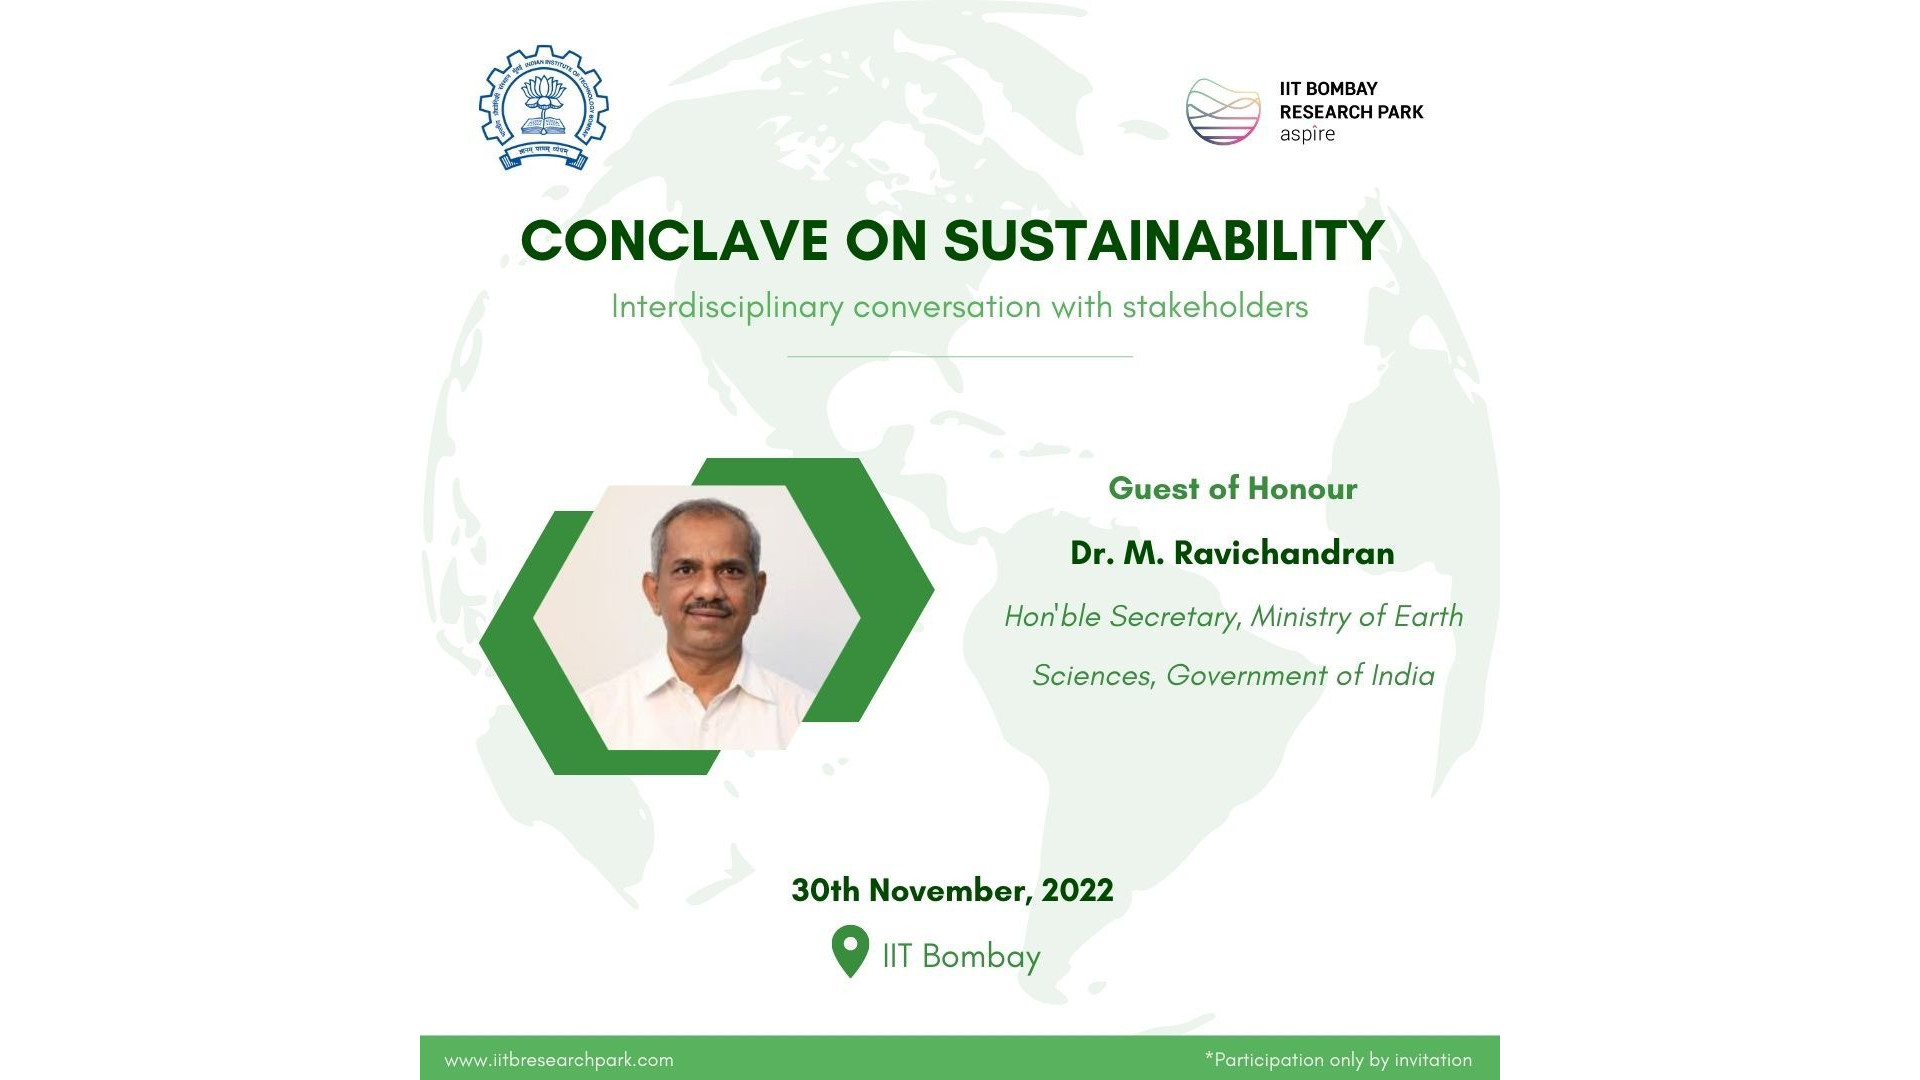 IIT Bombay Research Park to Host Conclave on Sustainability